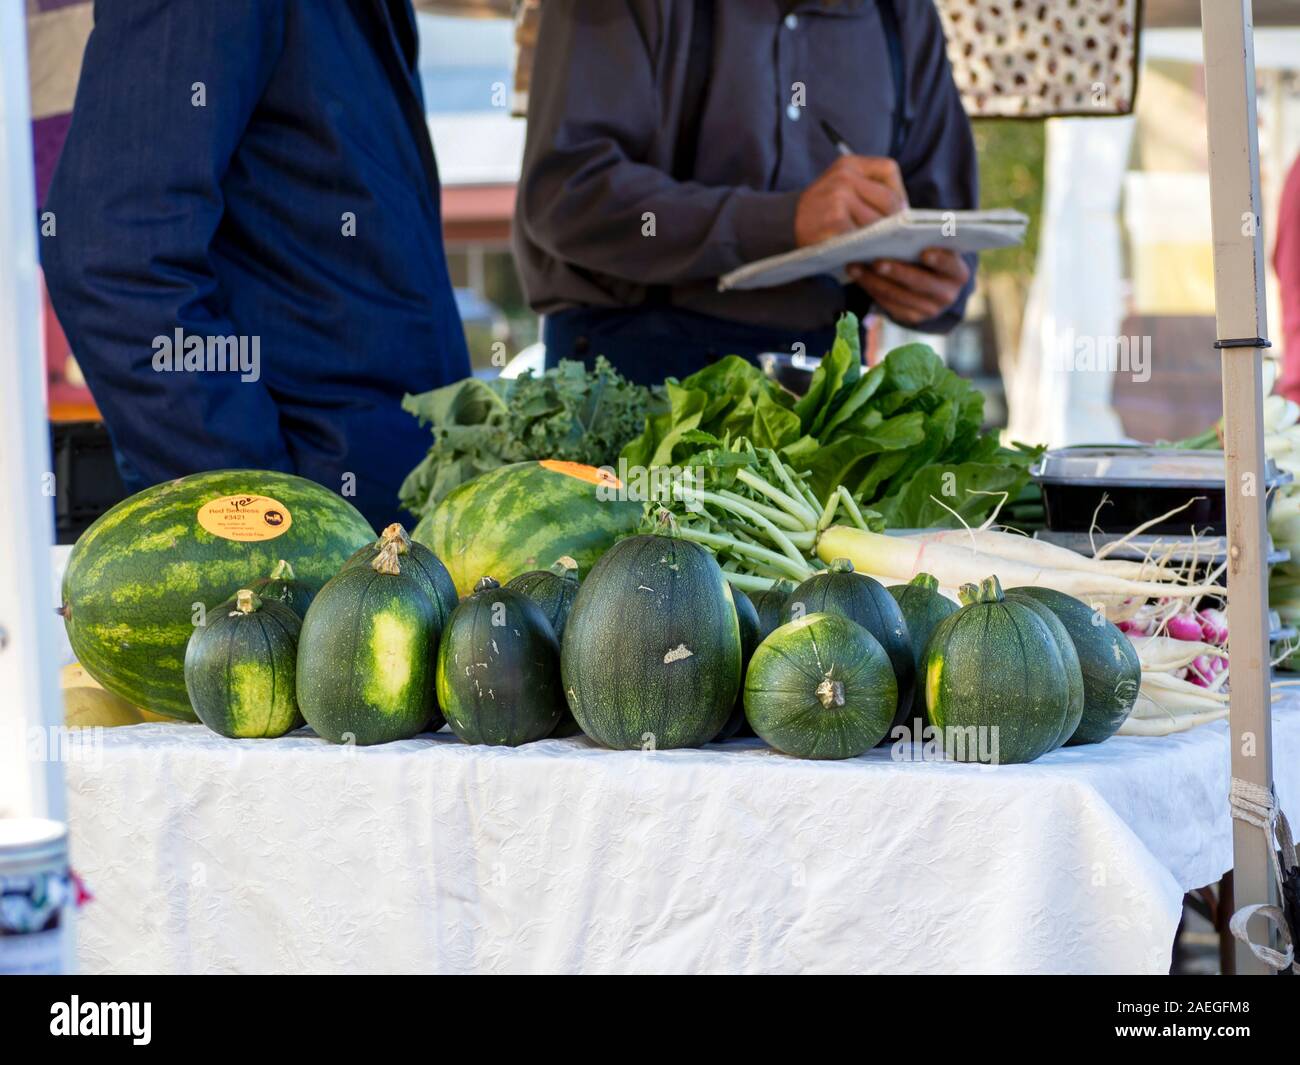 Watermelons and vegetables for sale displayed on a table at the Corpus Christi, Texas USA Southside Farmer's Market. Stock Photo